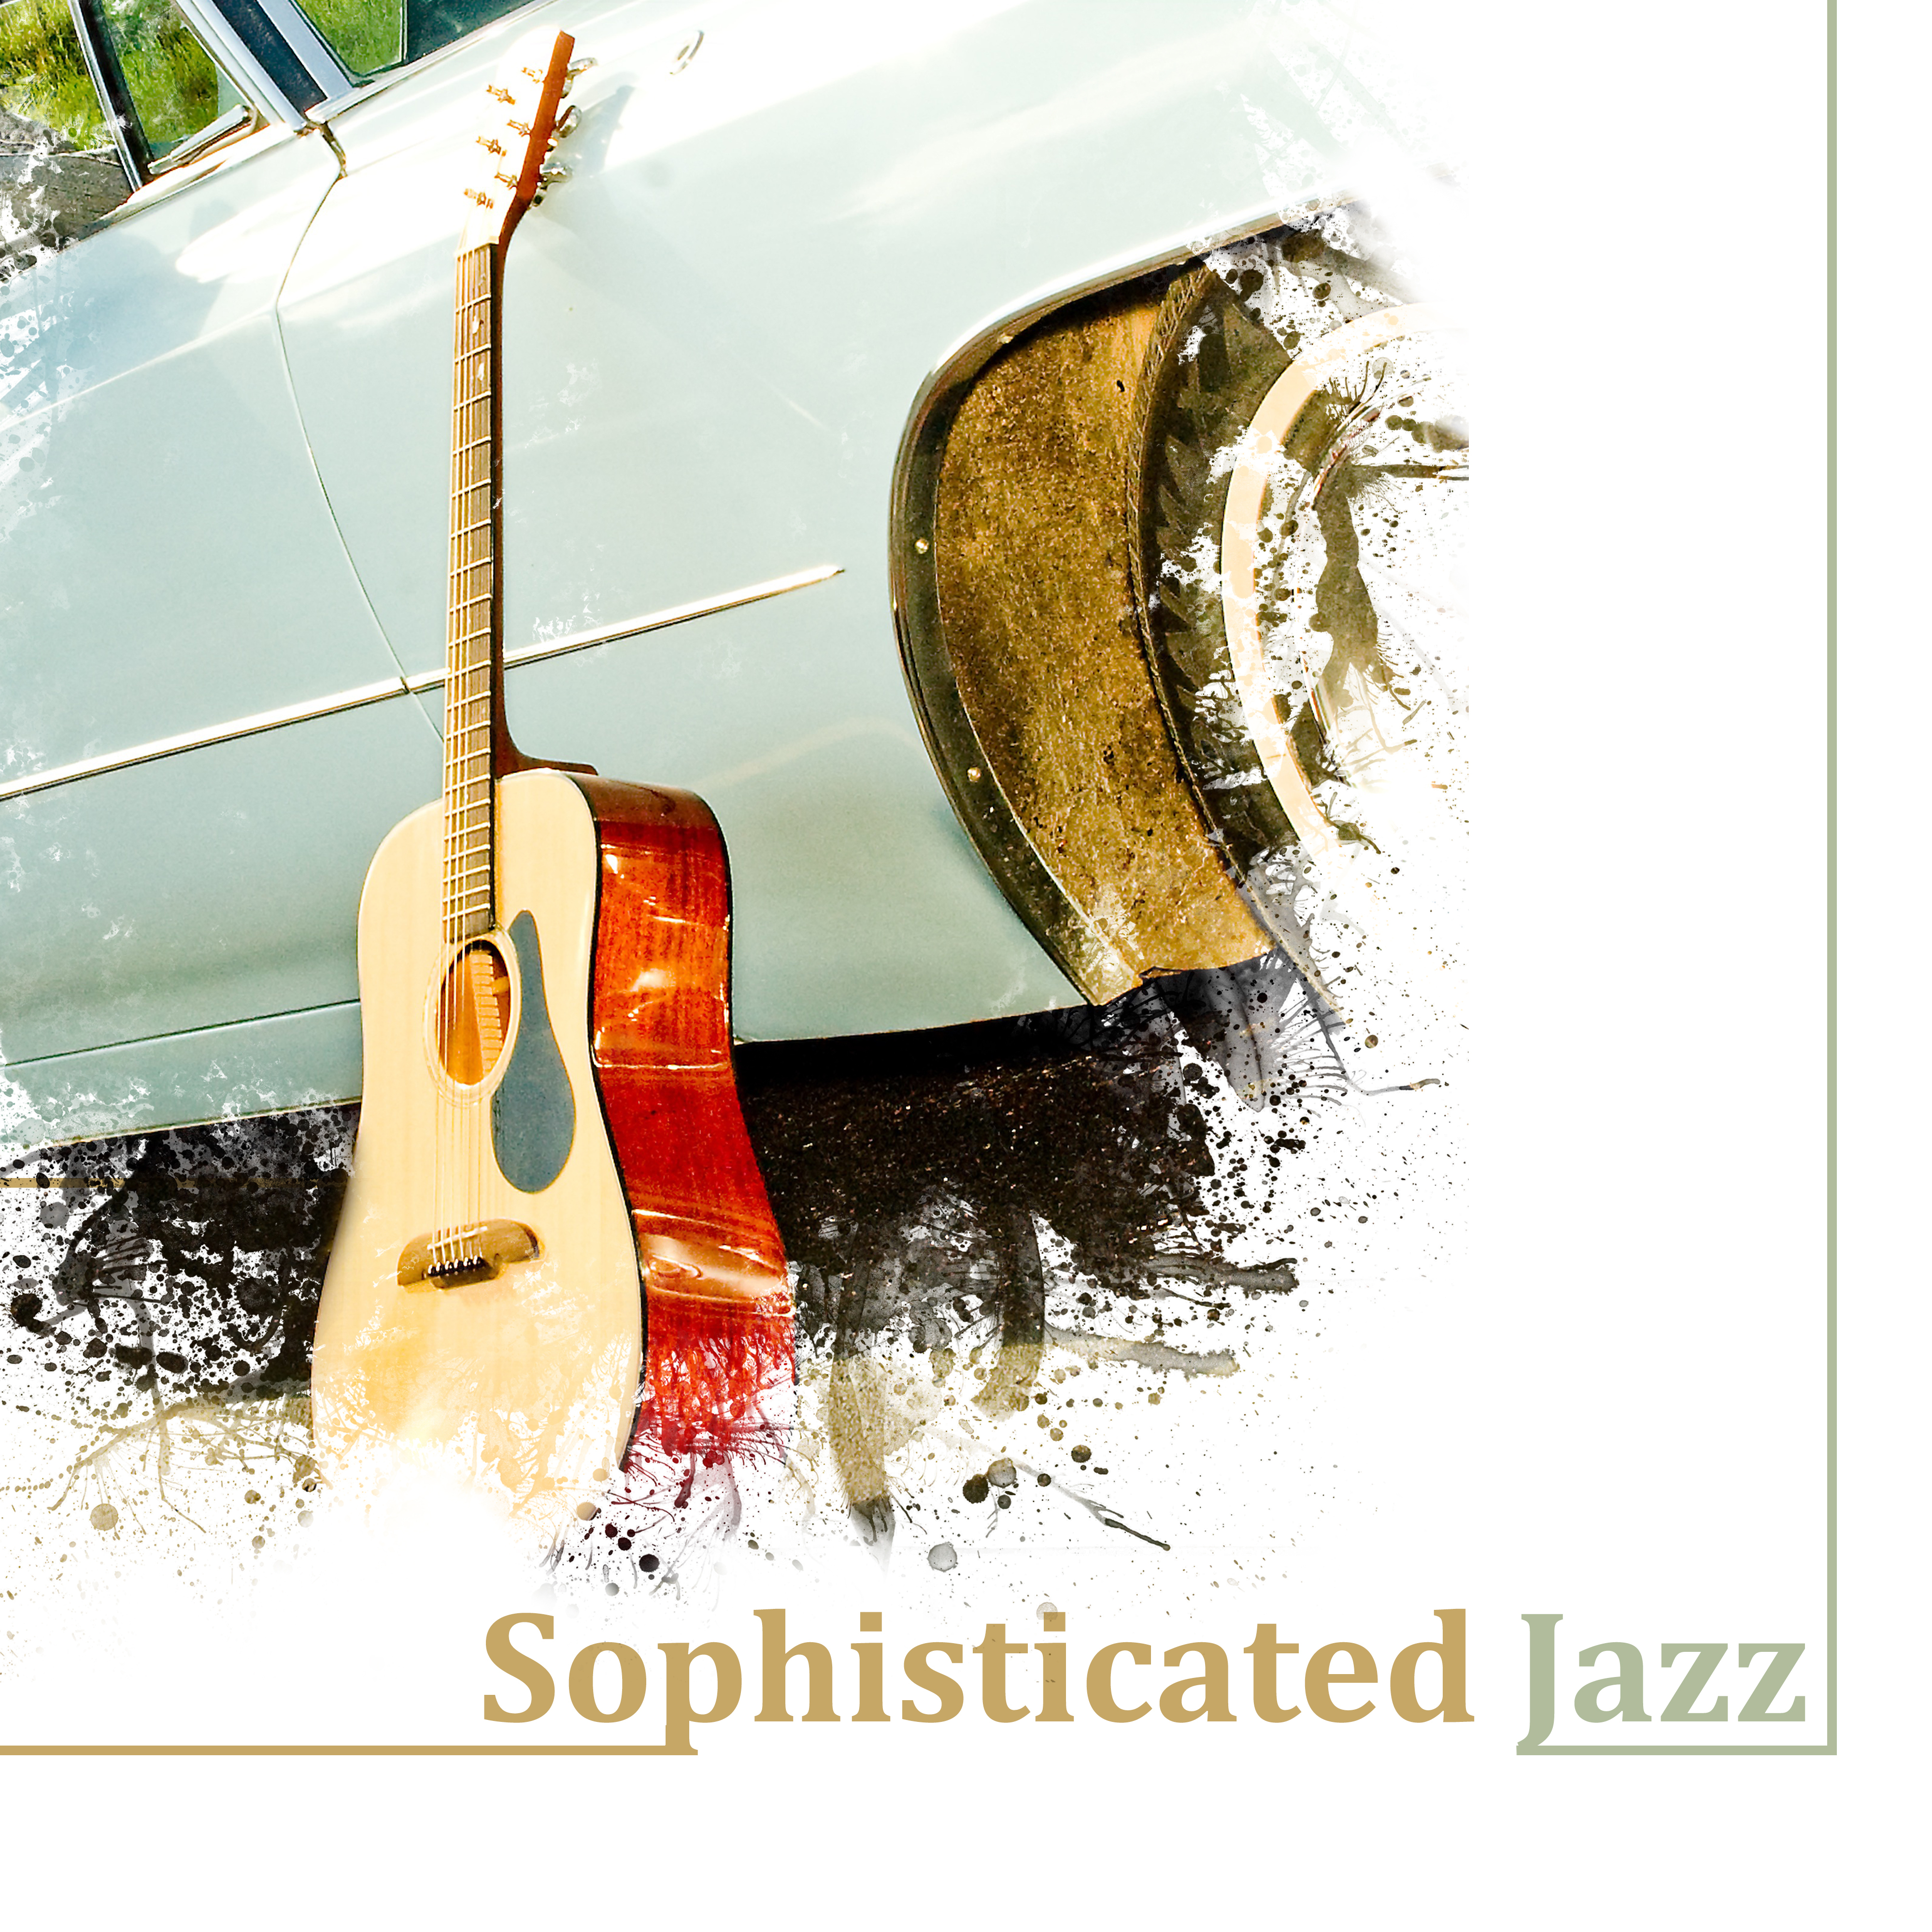 Sophisticated Jazz – Ambient Jazz, Instrumental Piano Music, Saxophone & Guitar Vibes in the Background